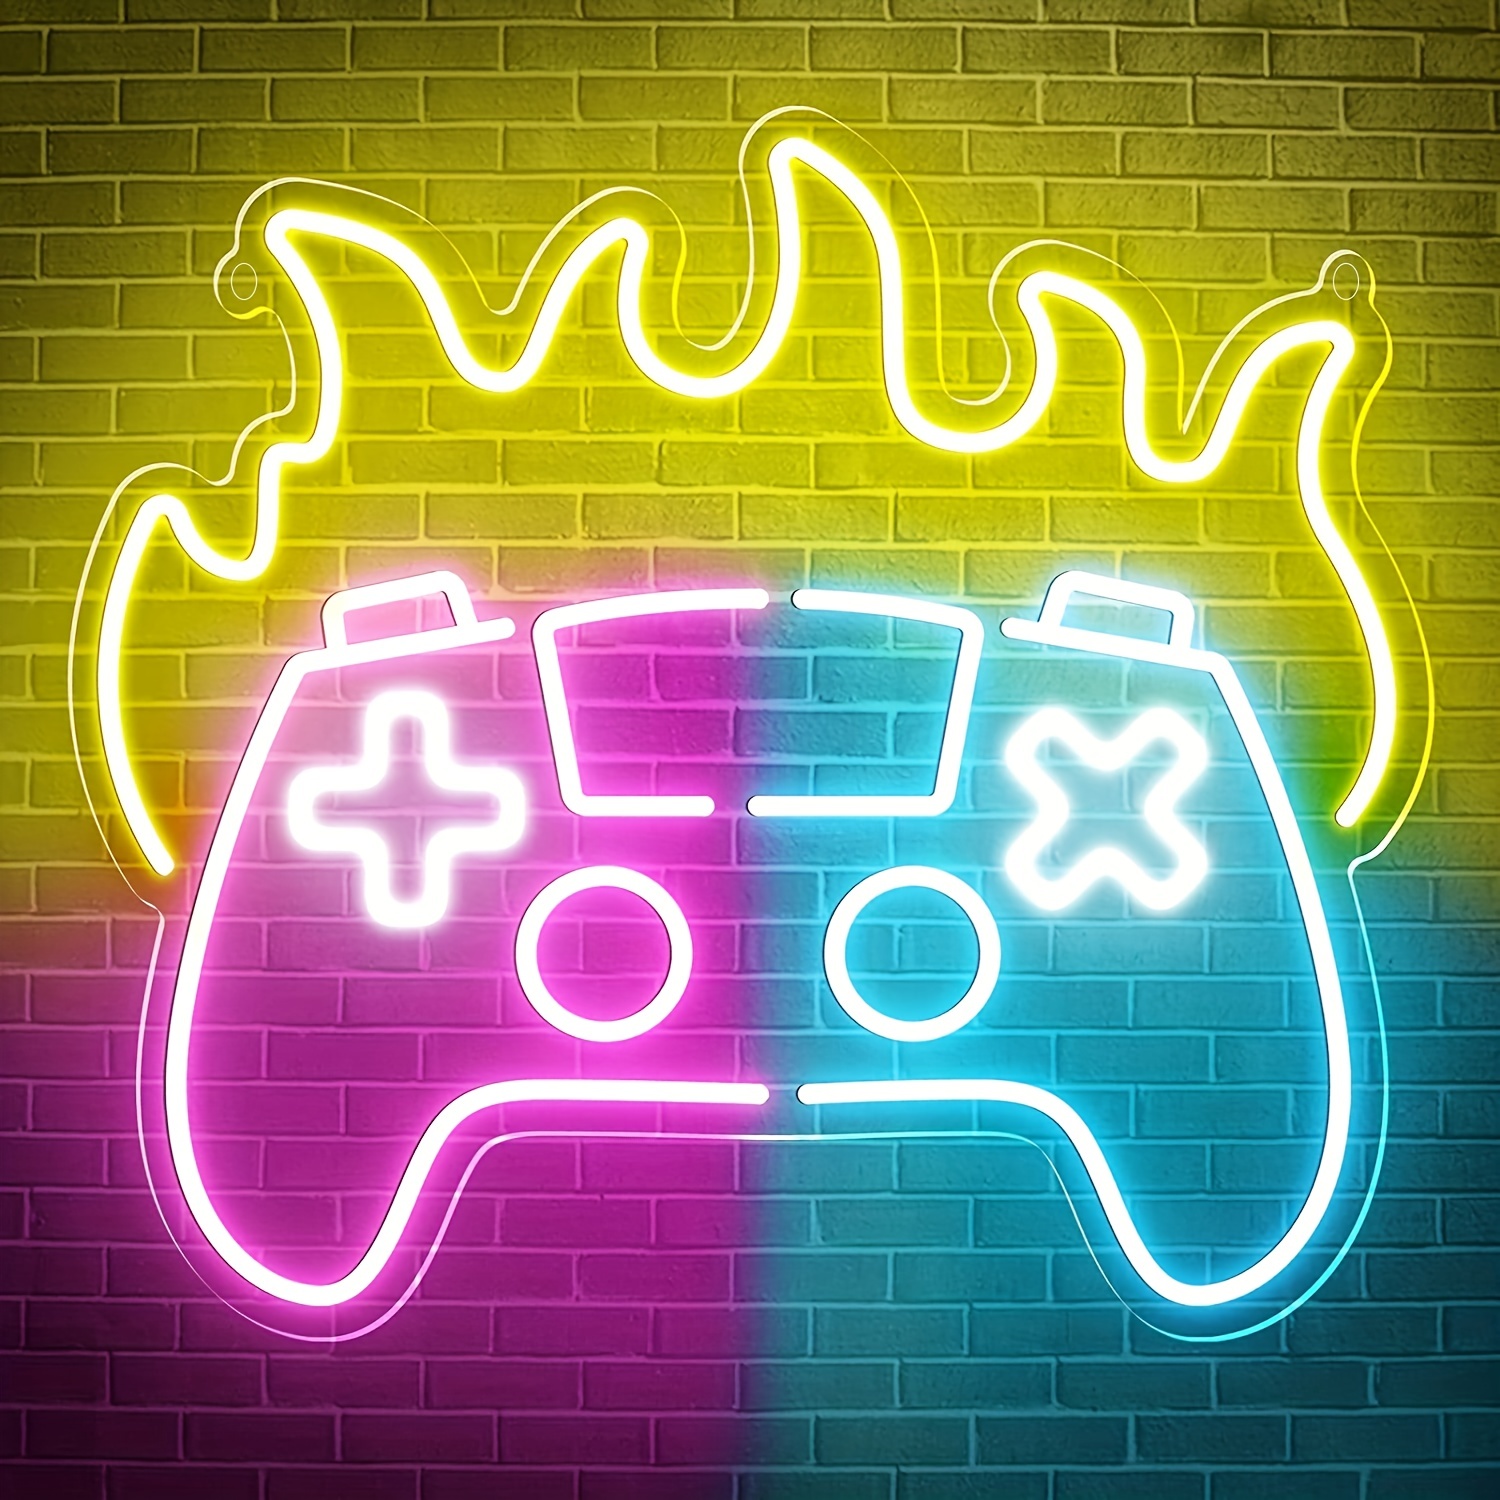  AurGun Game Control Neon Signs, 16x 11 Large Gamepad Shaped  LED Neon Sign for Bedroom Wall Decor Gaming Lights Gamer Birthday Festival  Gifts for Teen Boy Kids Game Room Decoration 